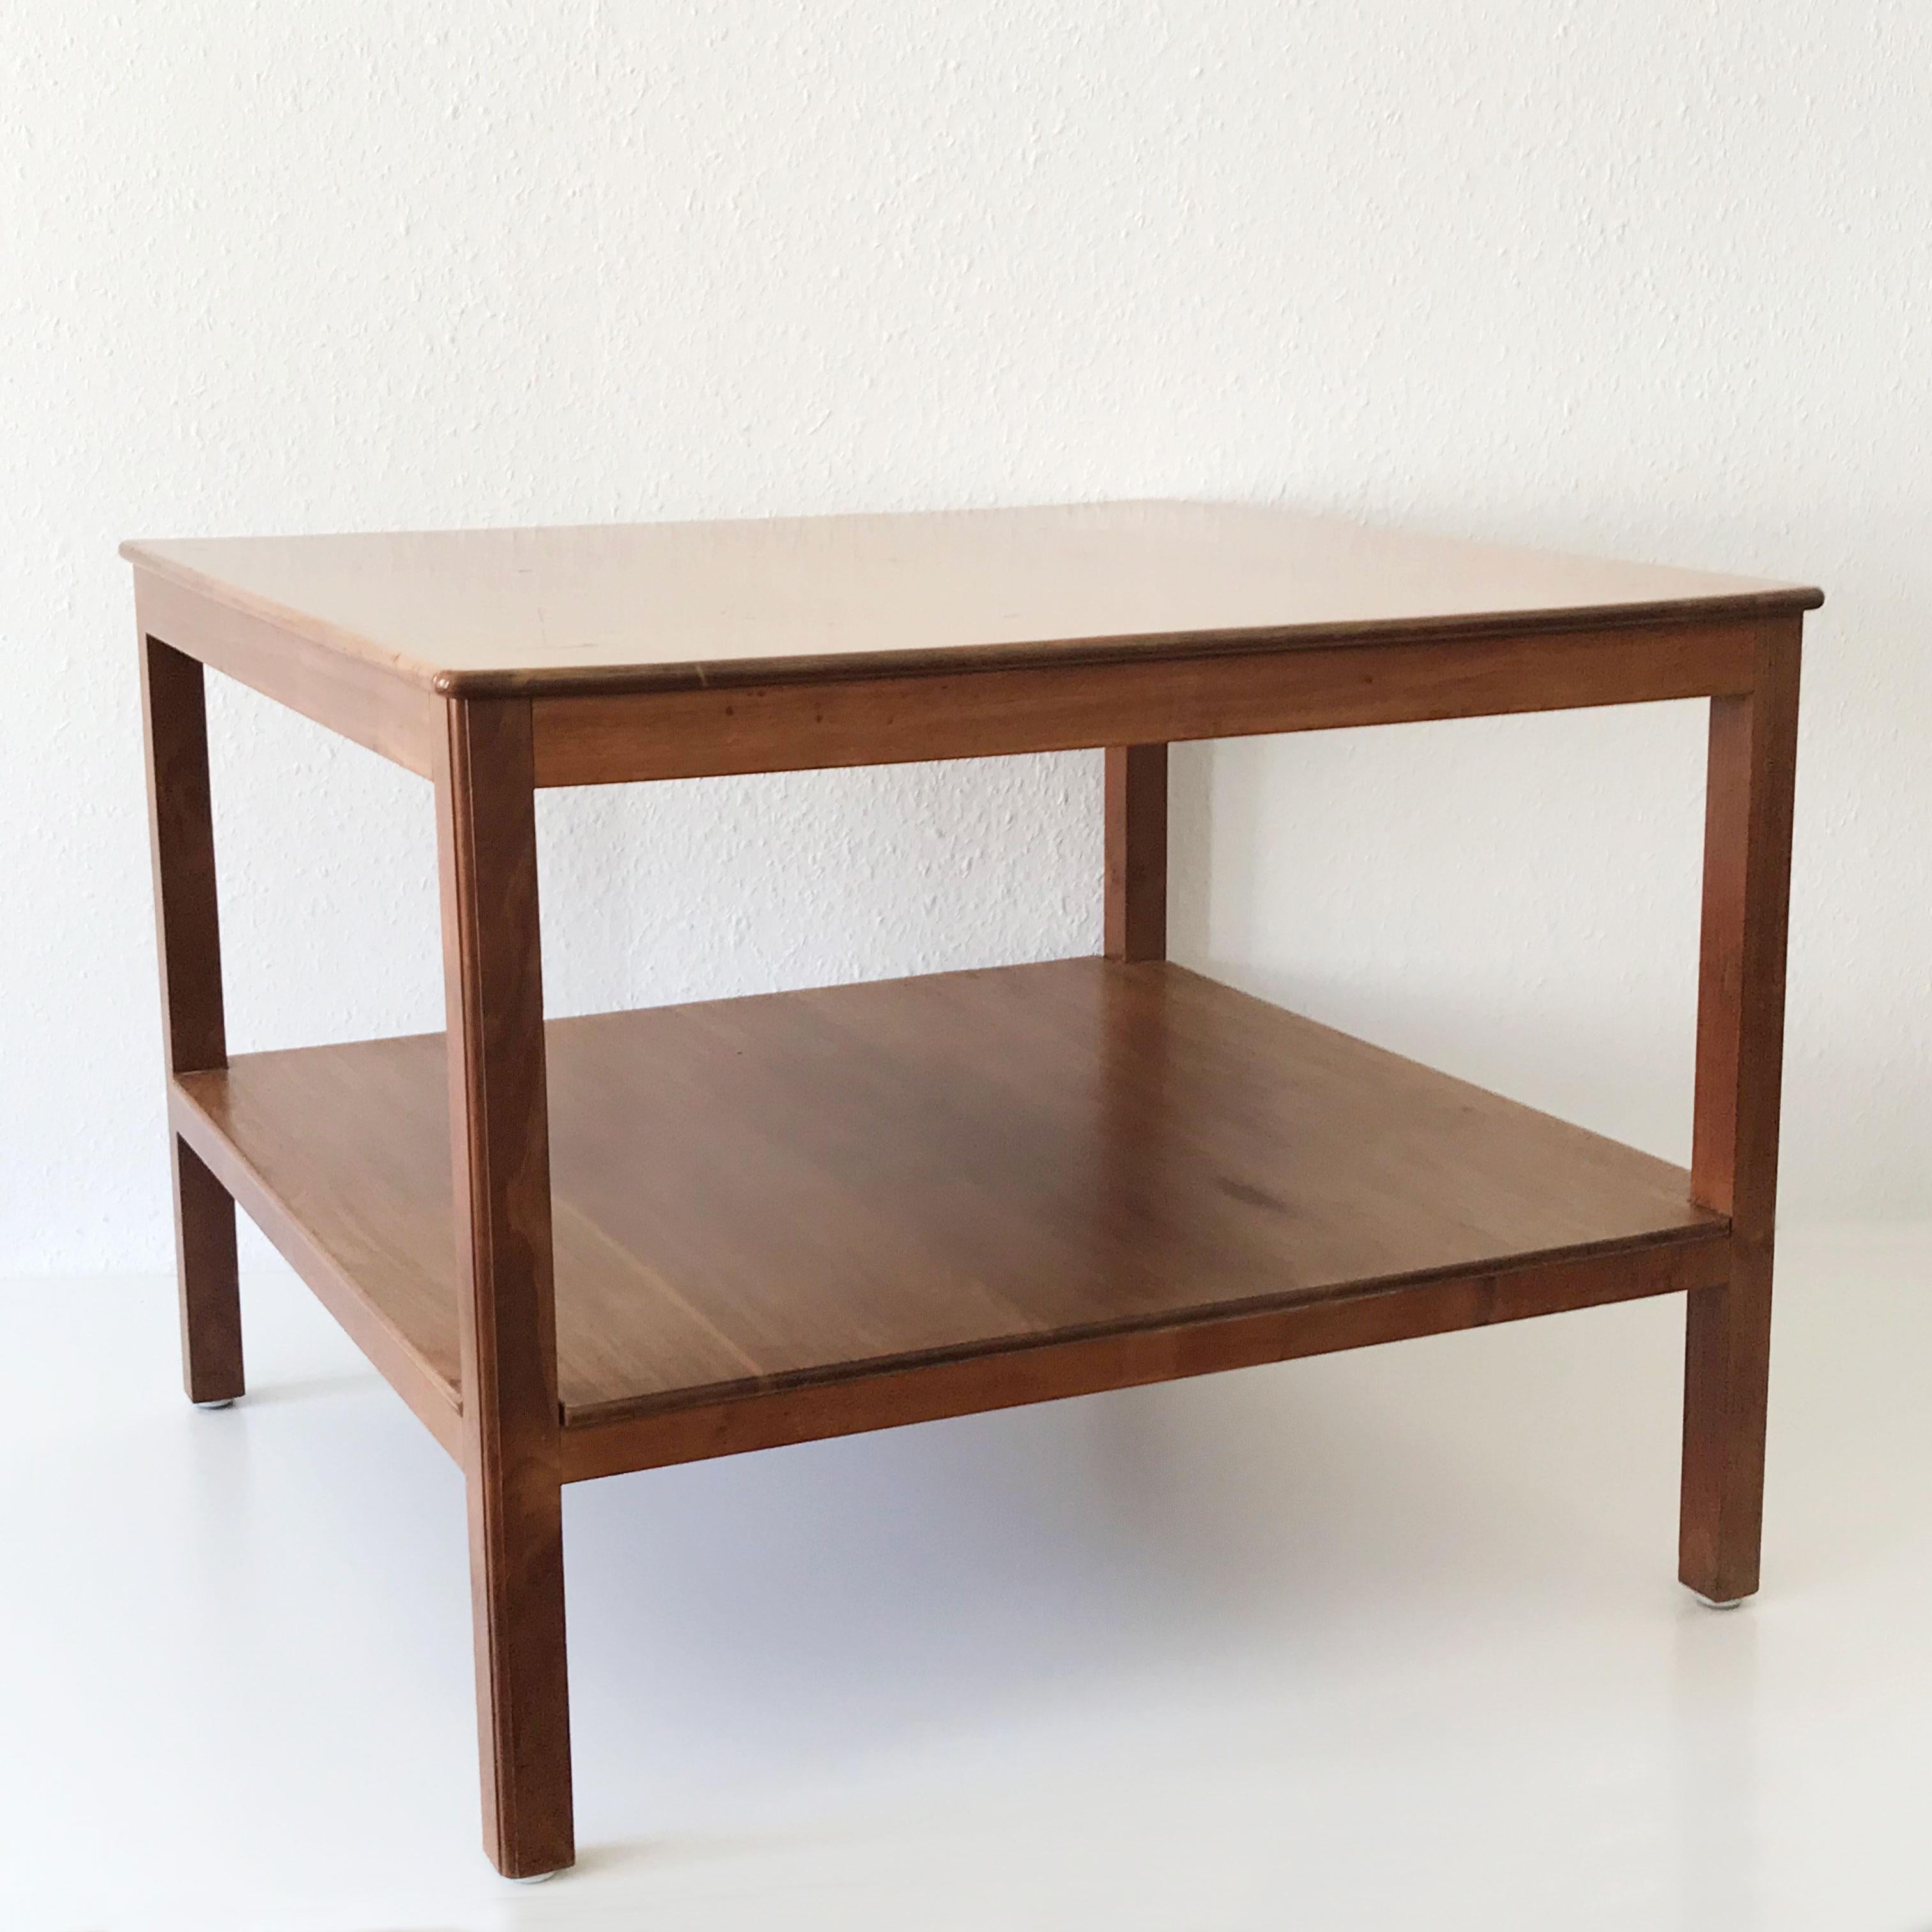 Minimalistic Coffee Mahogany Table by Kaare Klint for Rud Rasmussen Denmark 1934 In Good Condition For Sale In Munich, DE